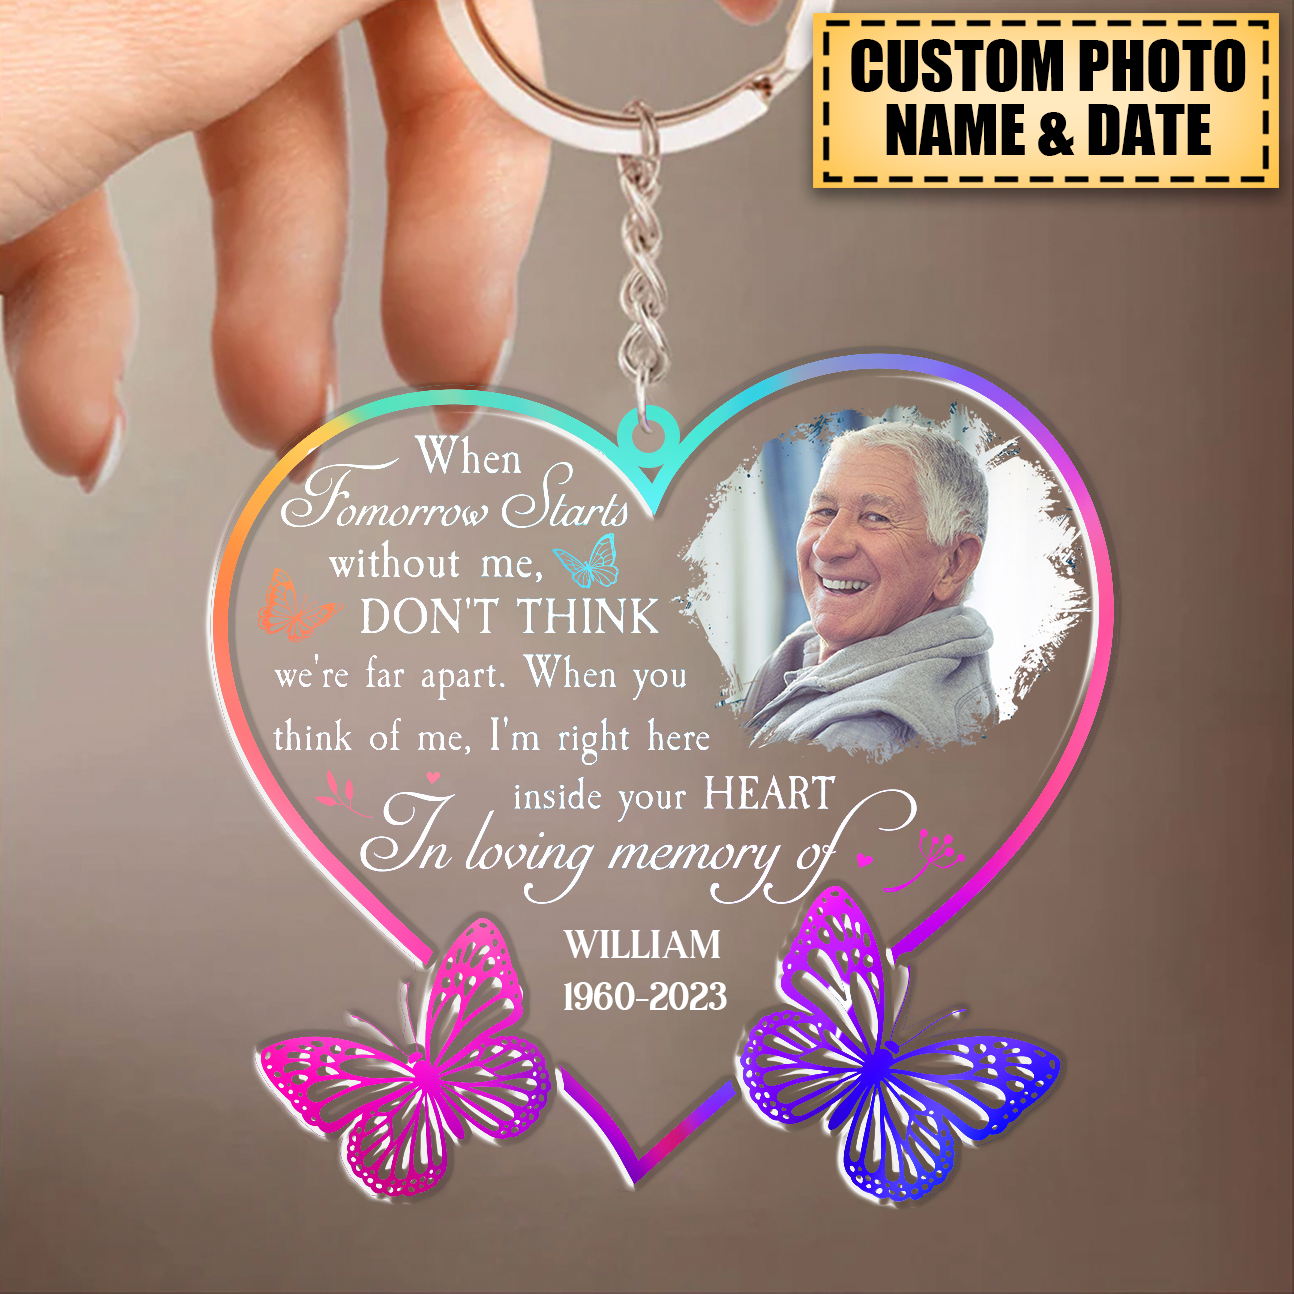 I'm Right Here Inside Your Heart - Personalized Memorial Acrylic Keychain